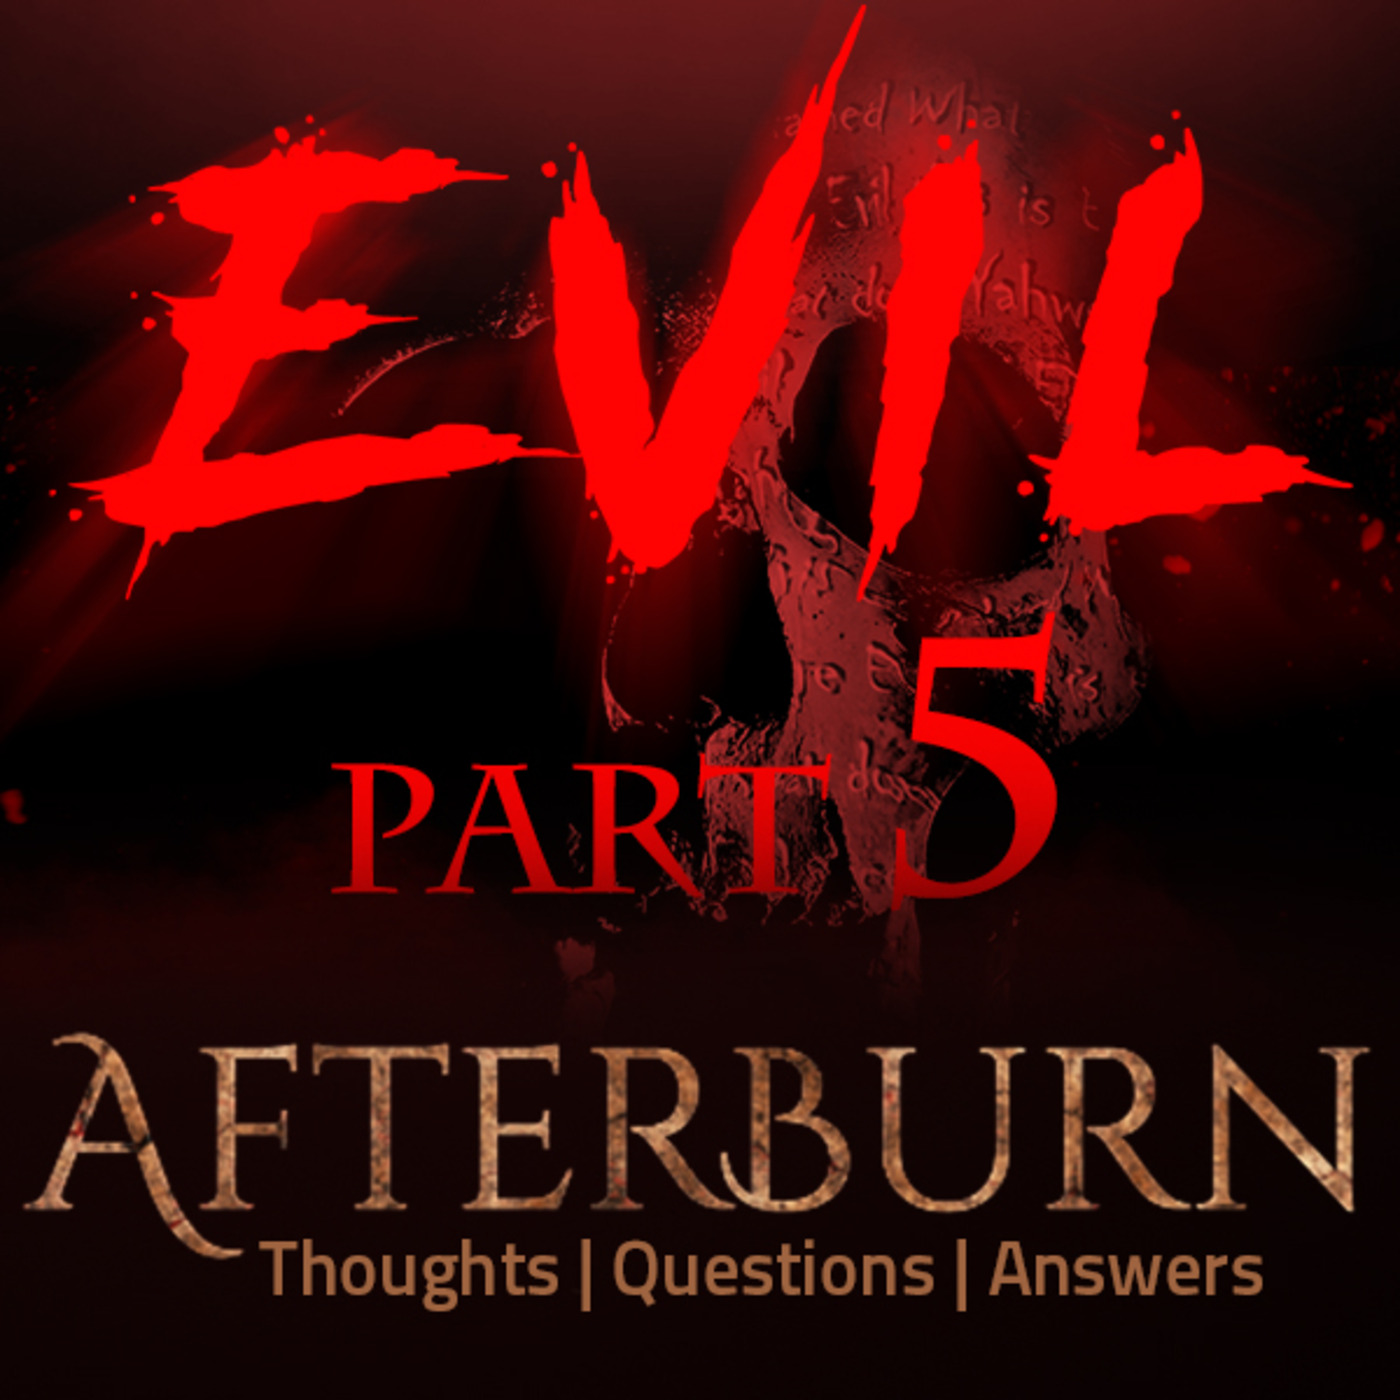 Episode 712: Afterburn | Thoughts, Q&A on Evil | Part 5